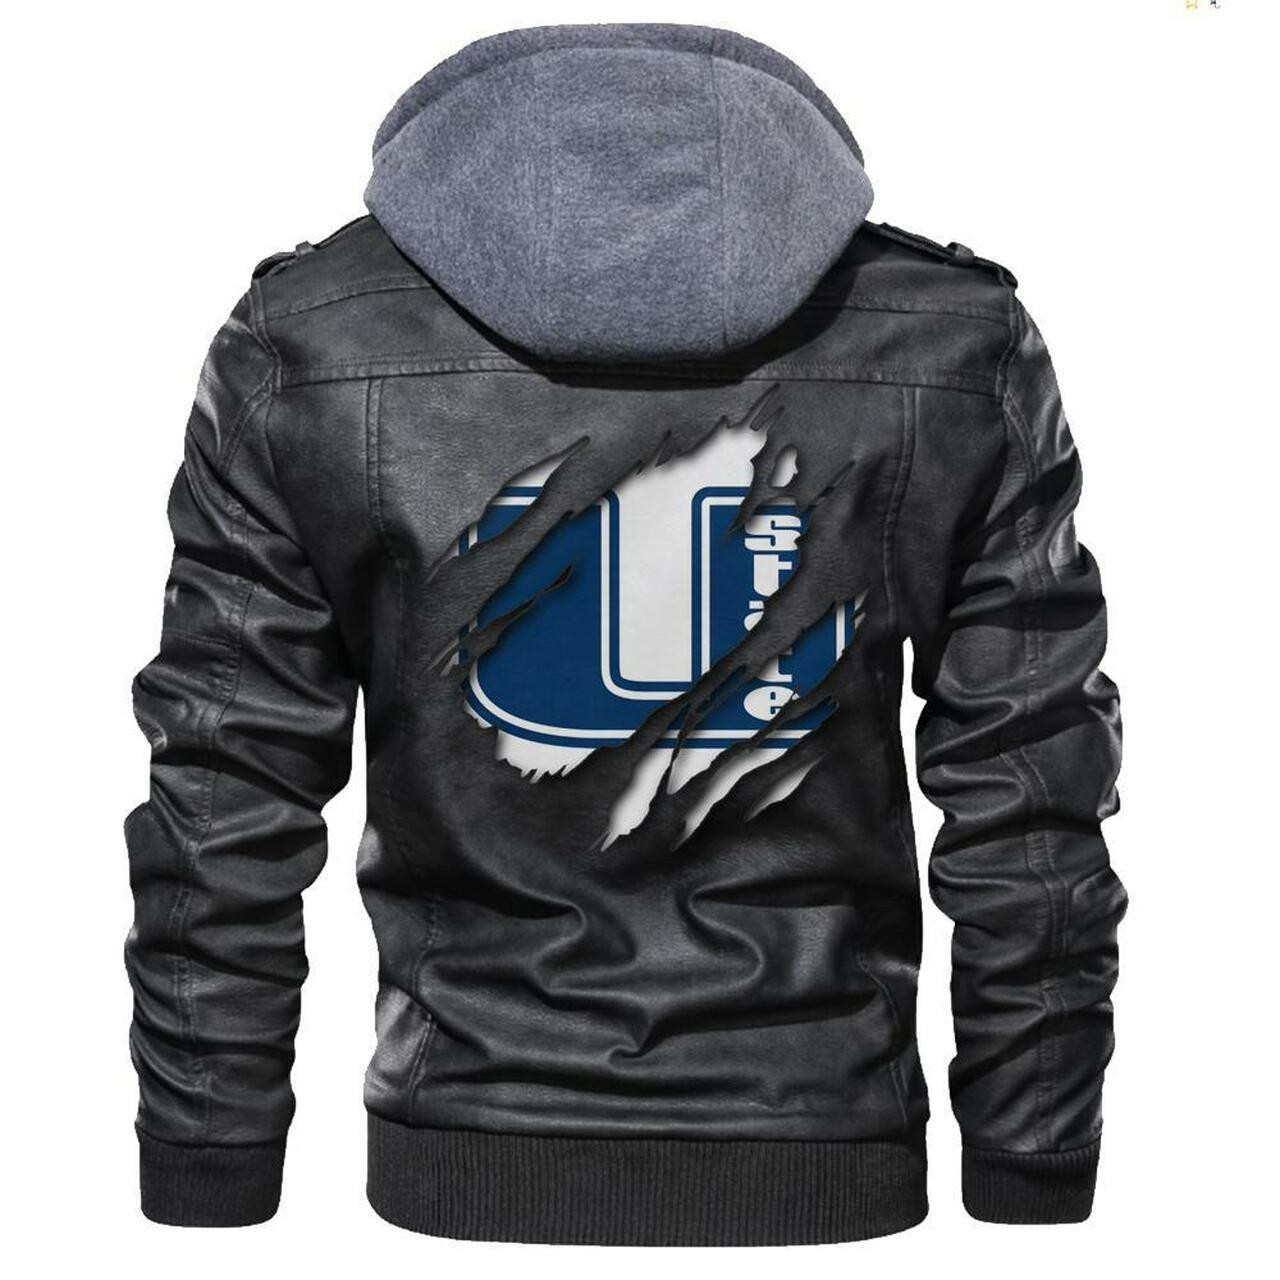 Don't wait another minute, Get Hot Leather Jacket today 140